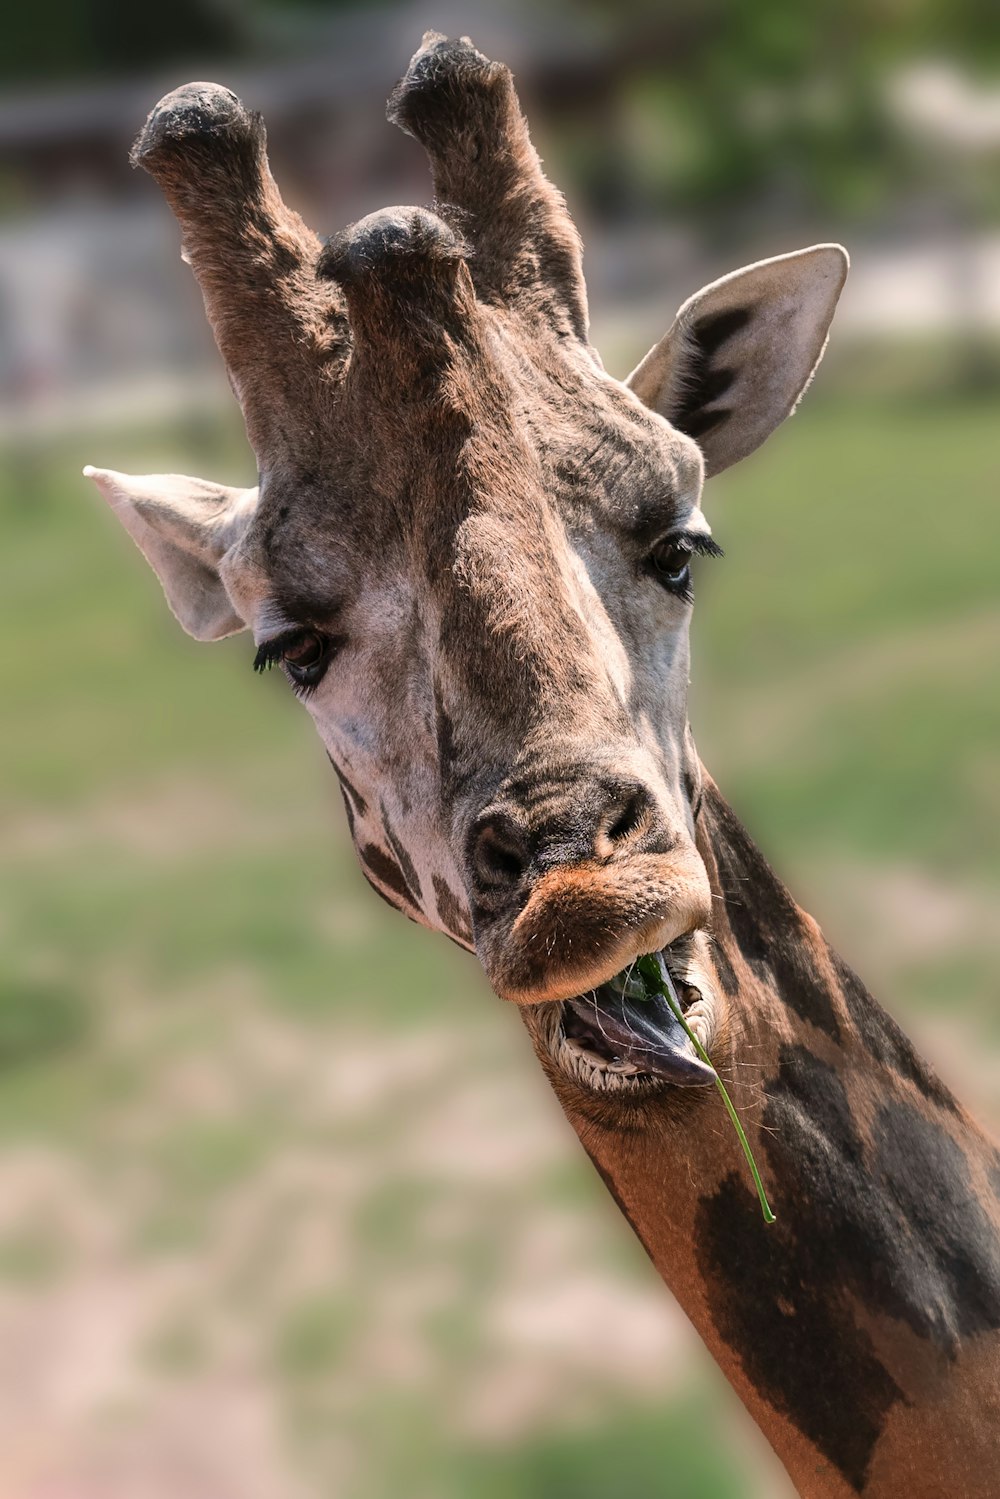 a giraffe eating a green leafy plant in its mouth